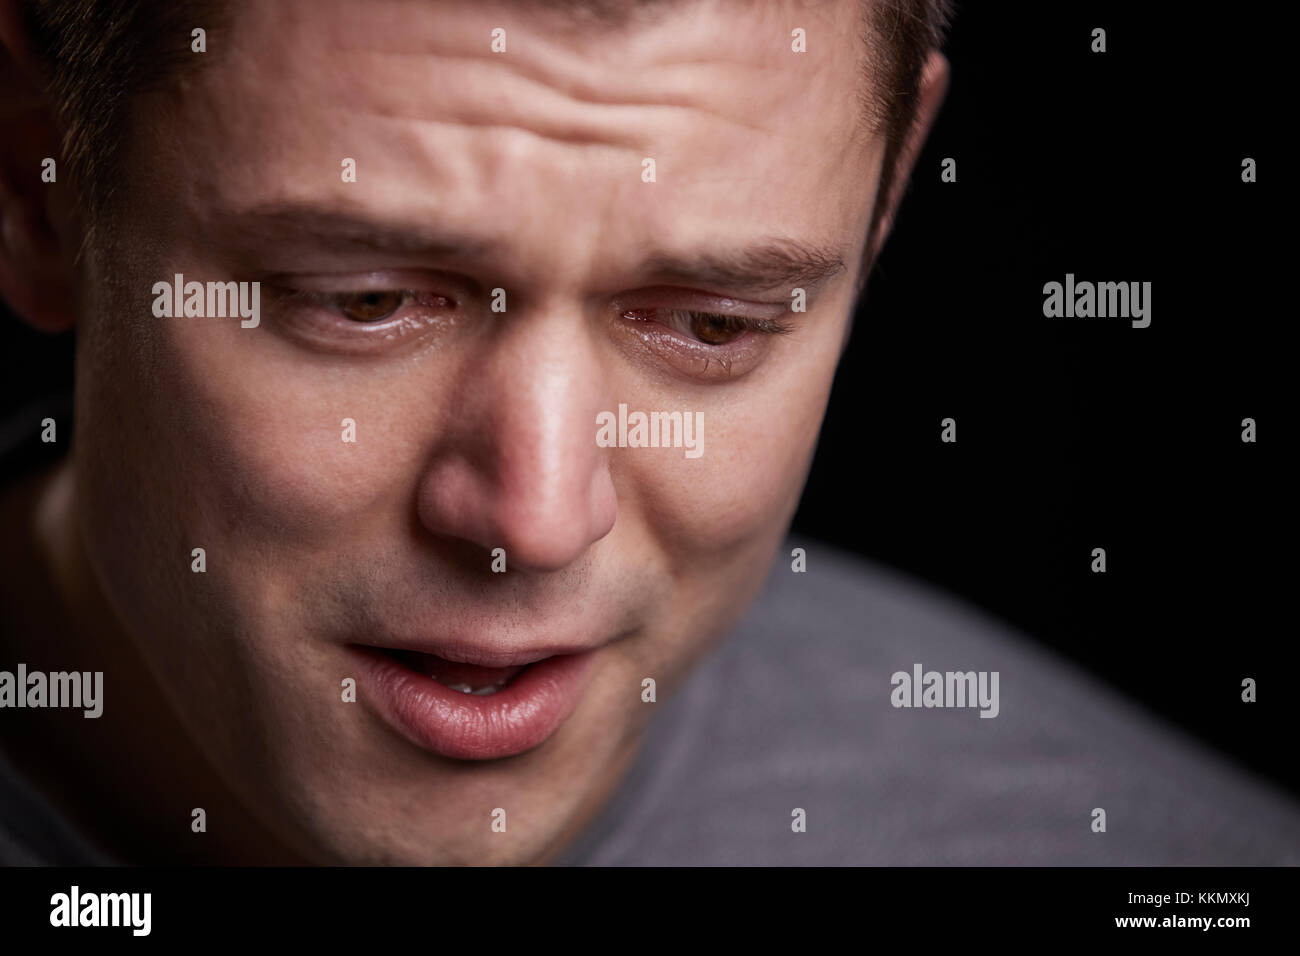 Close up portrait of crying young white man looking down Stock Photo